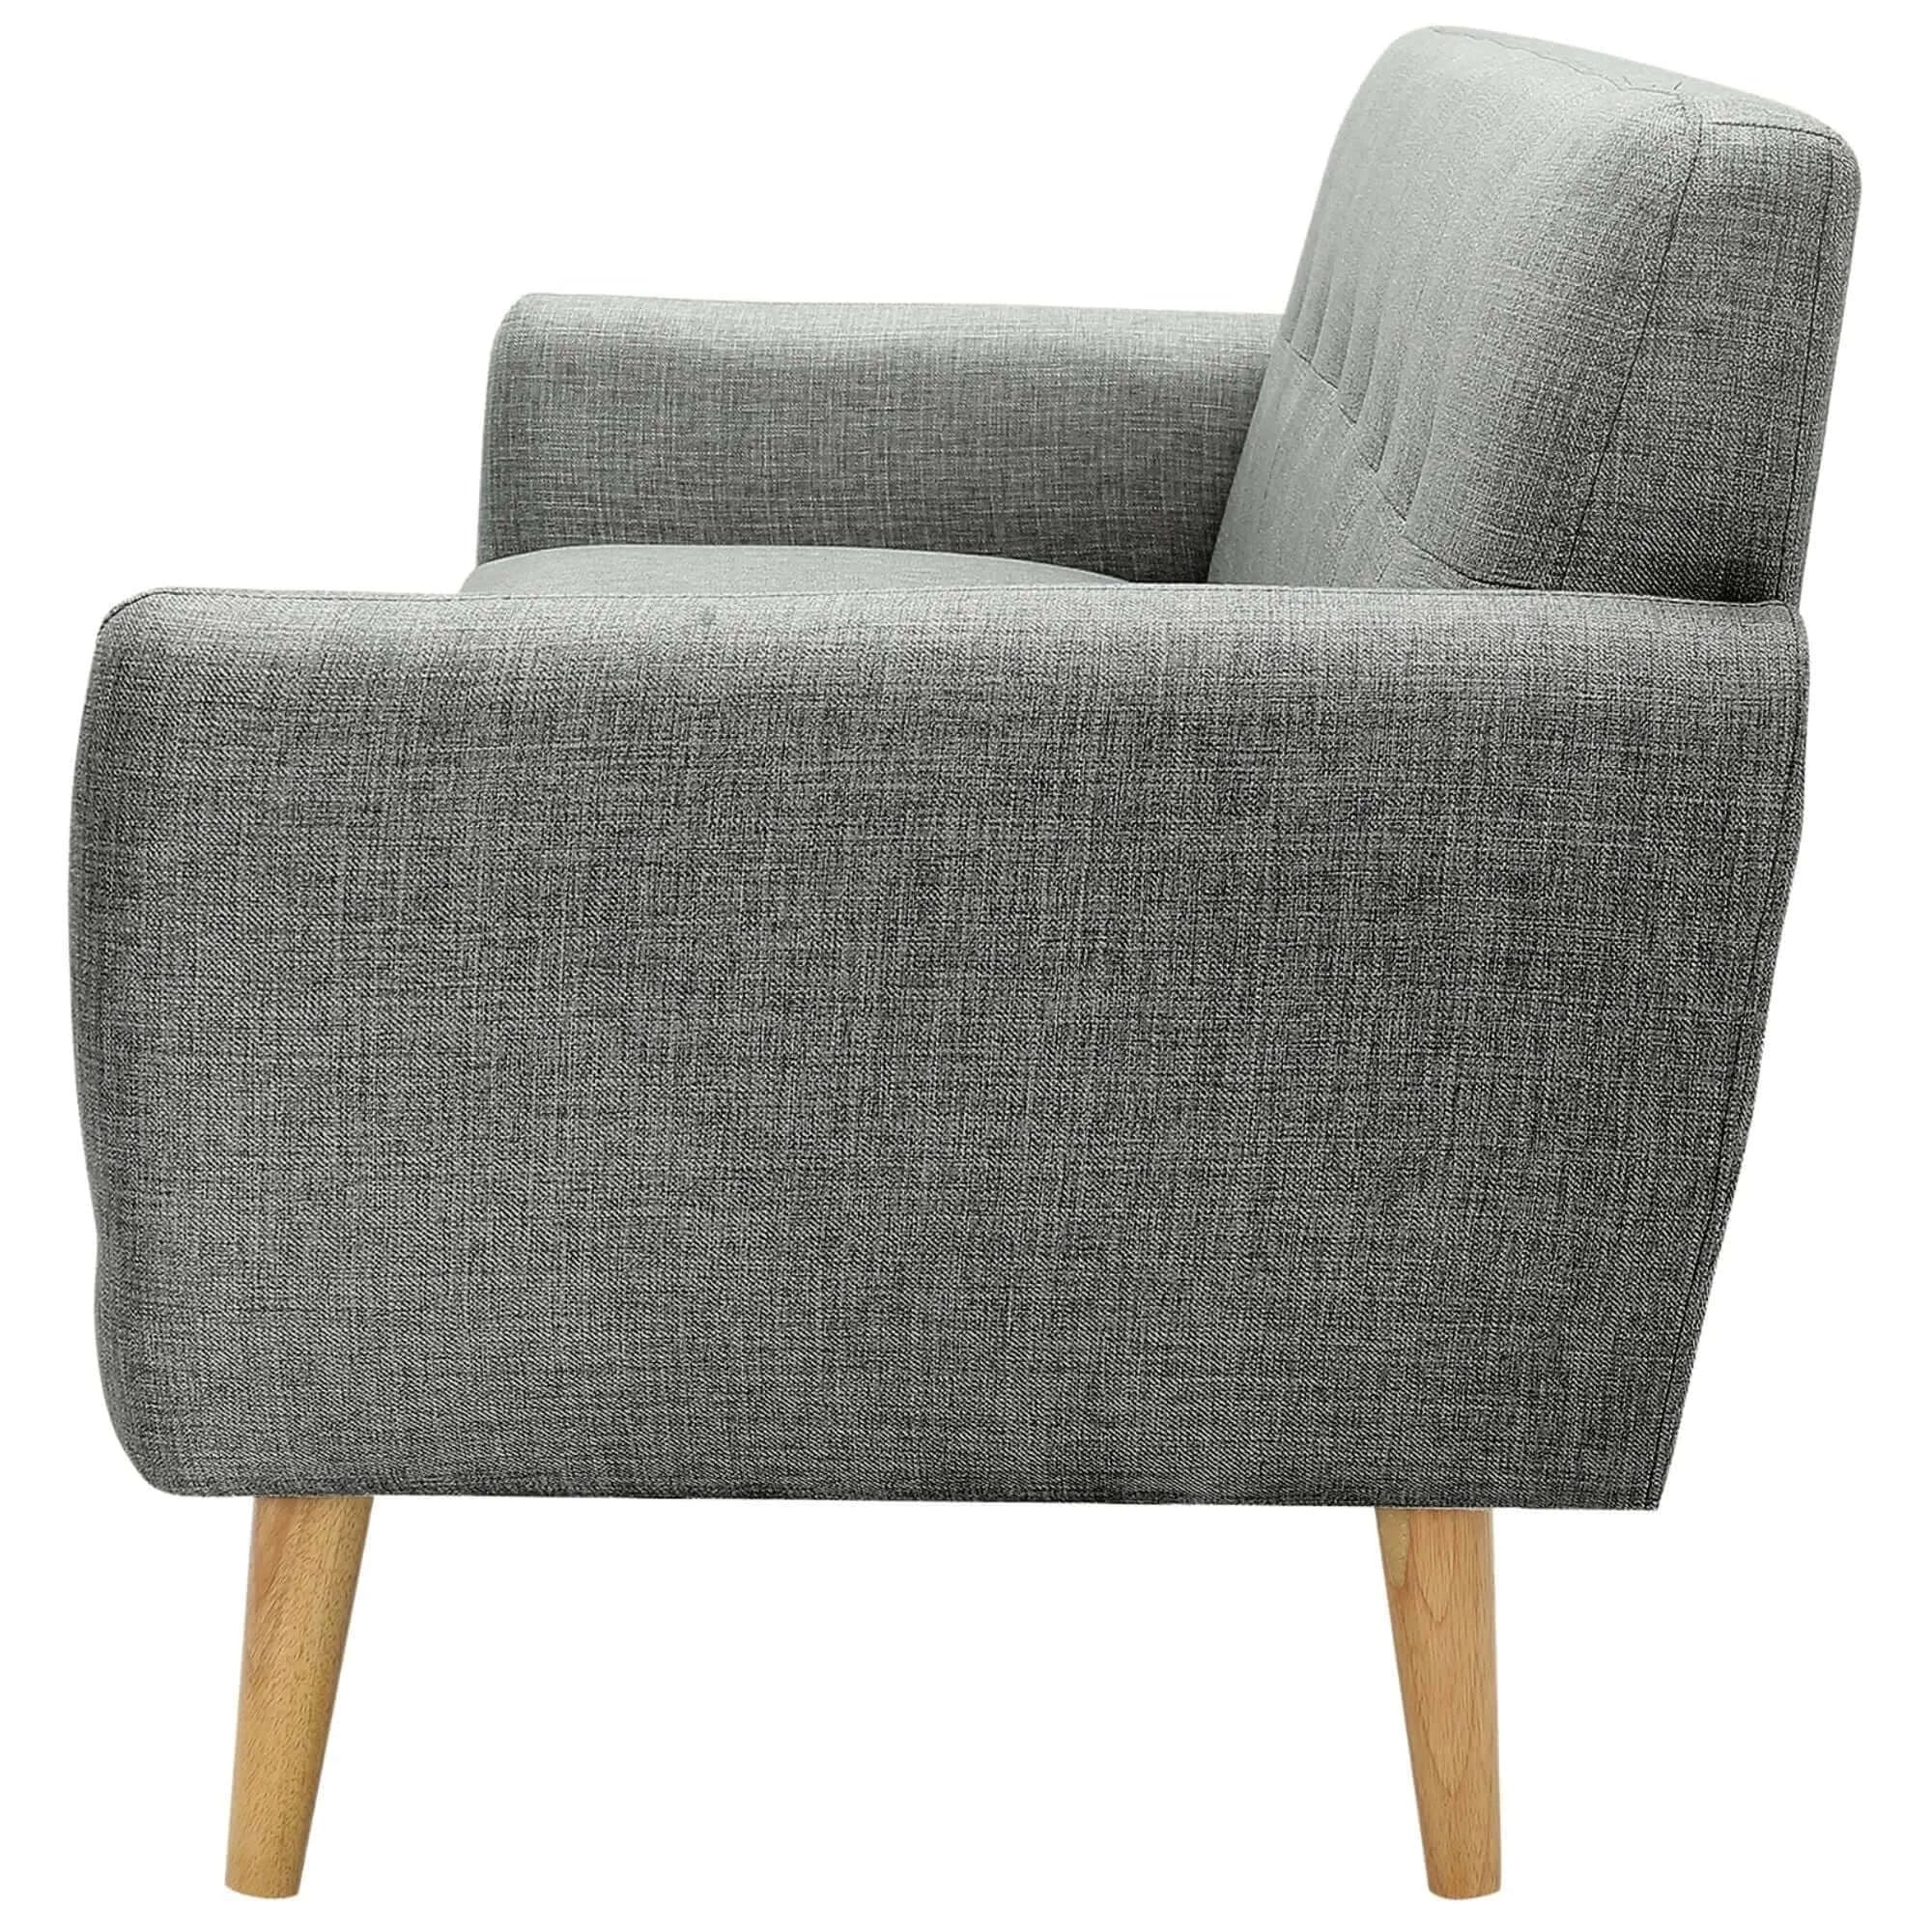 Buy dane 3 + 1 seater fabric upholstered sofa armchair lounge couch - mid grey - upinteriors-Upinteriors